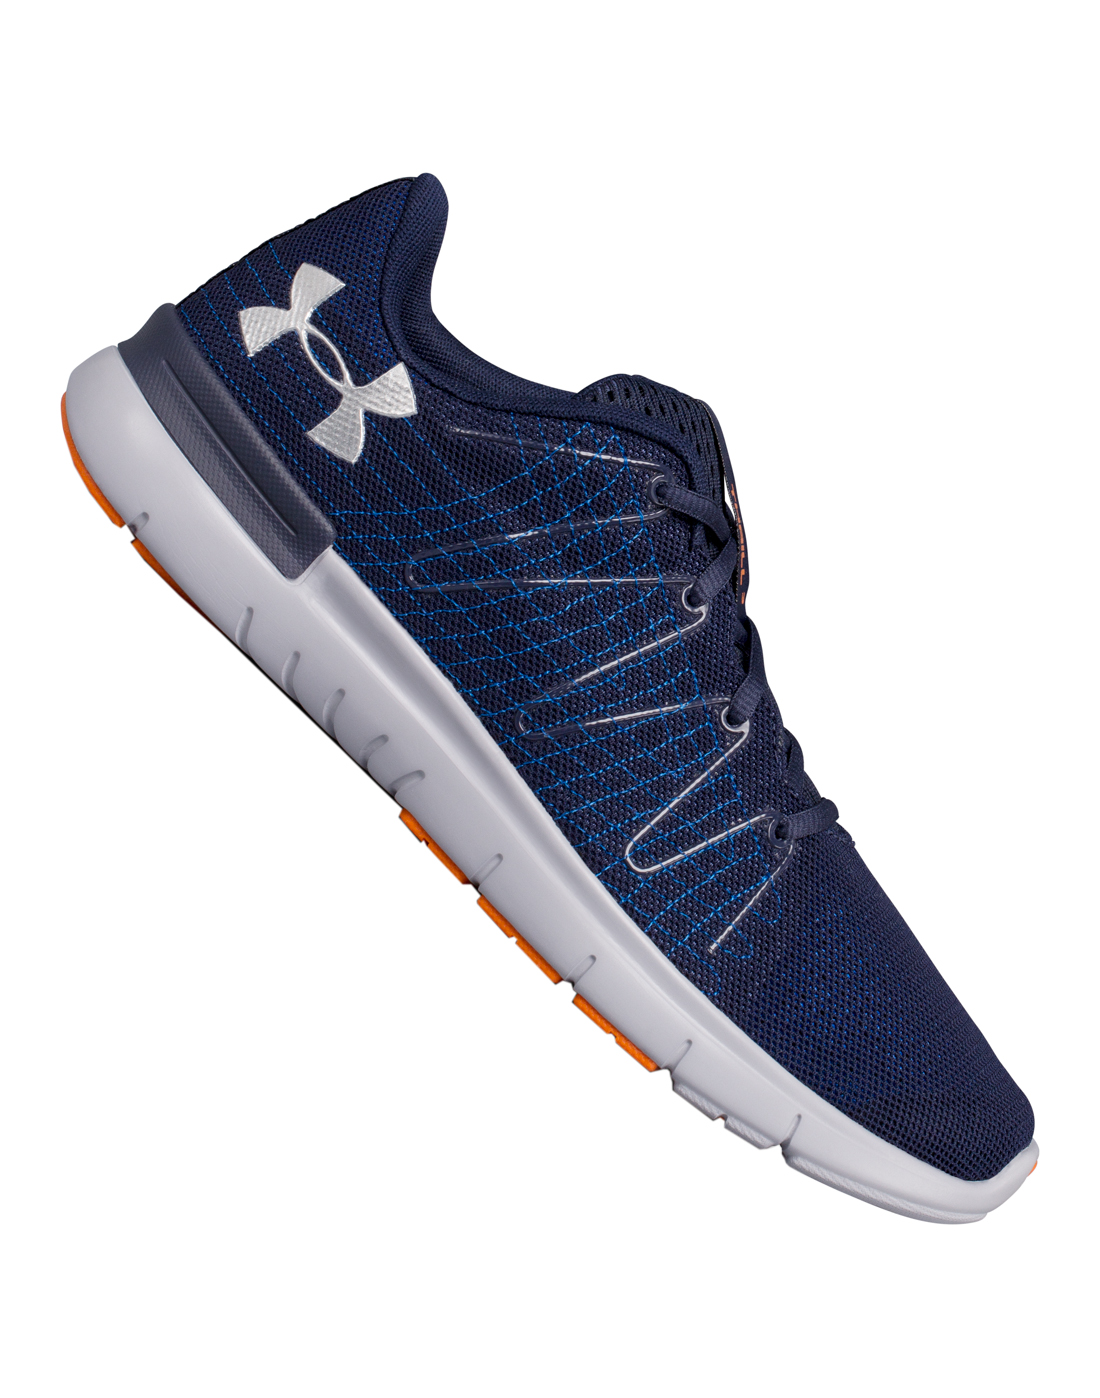 Under Armour Mens Thrill - Navy Life Style Sports IE